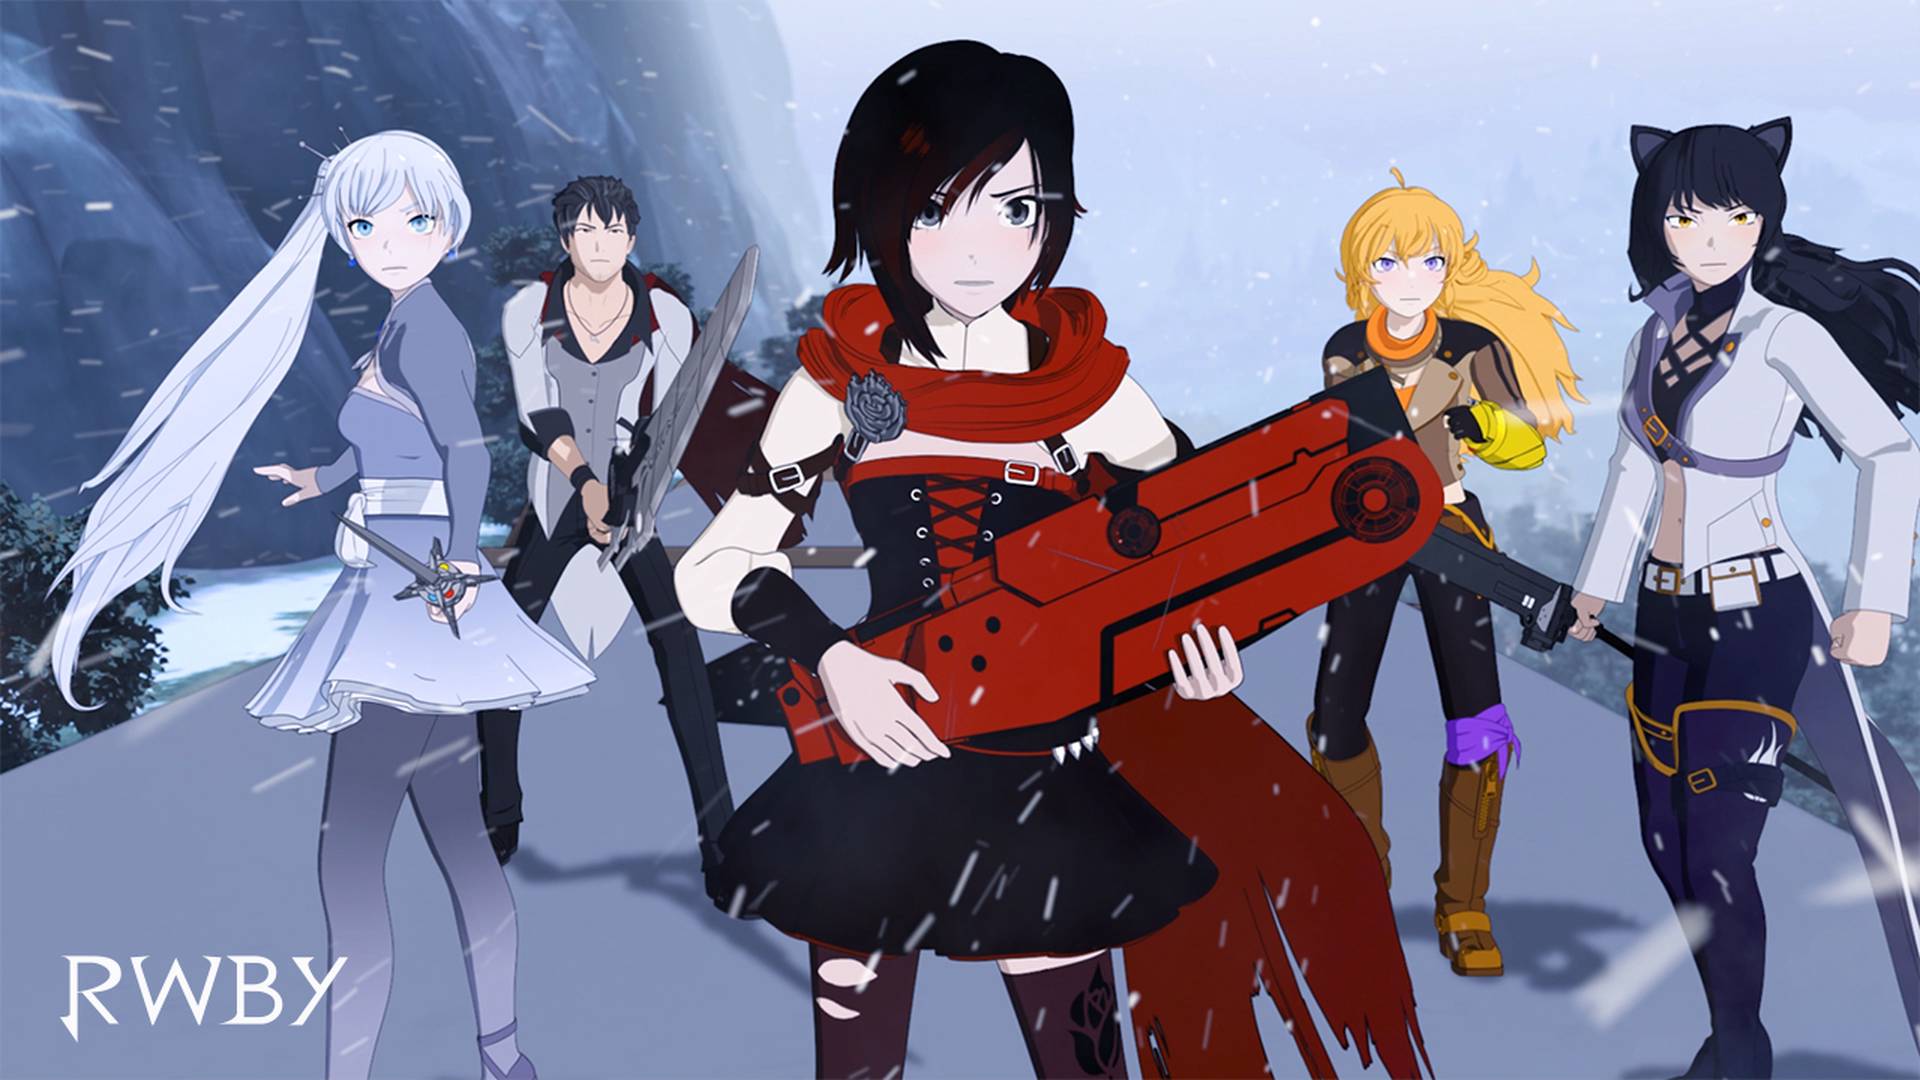 Ruby gets ready for a battle atop a train in the premiere of Vol. 6; from left to right, Weiss, Qrow, Ruby, Yang, Blake.